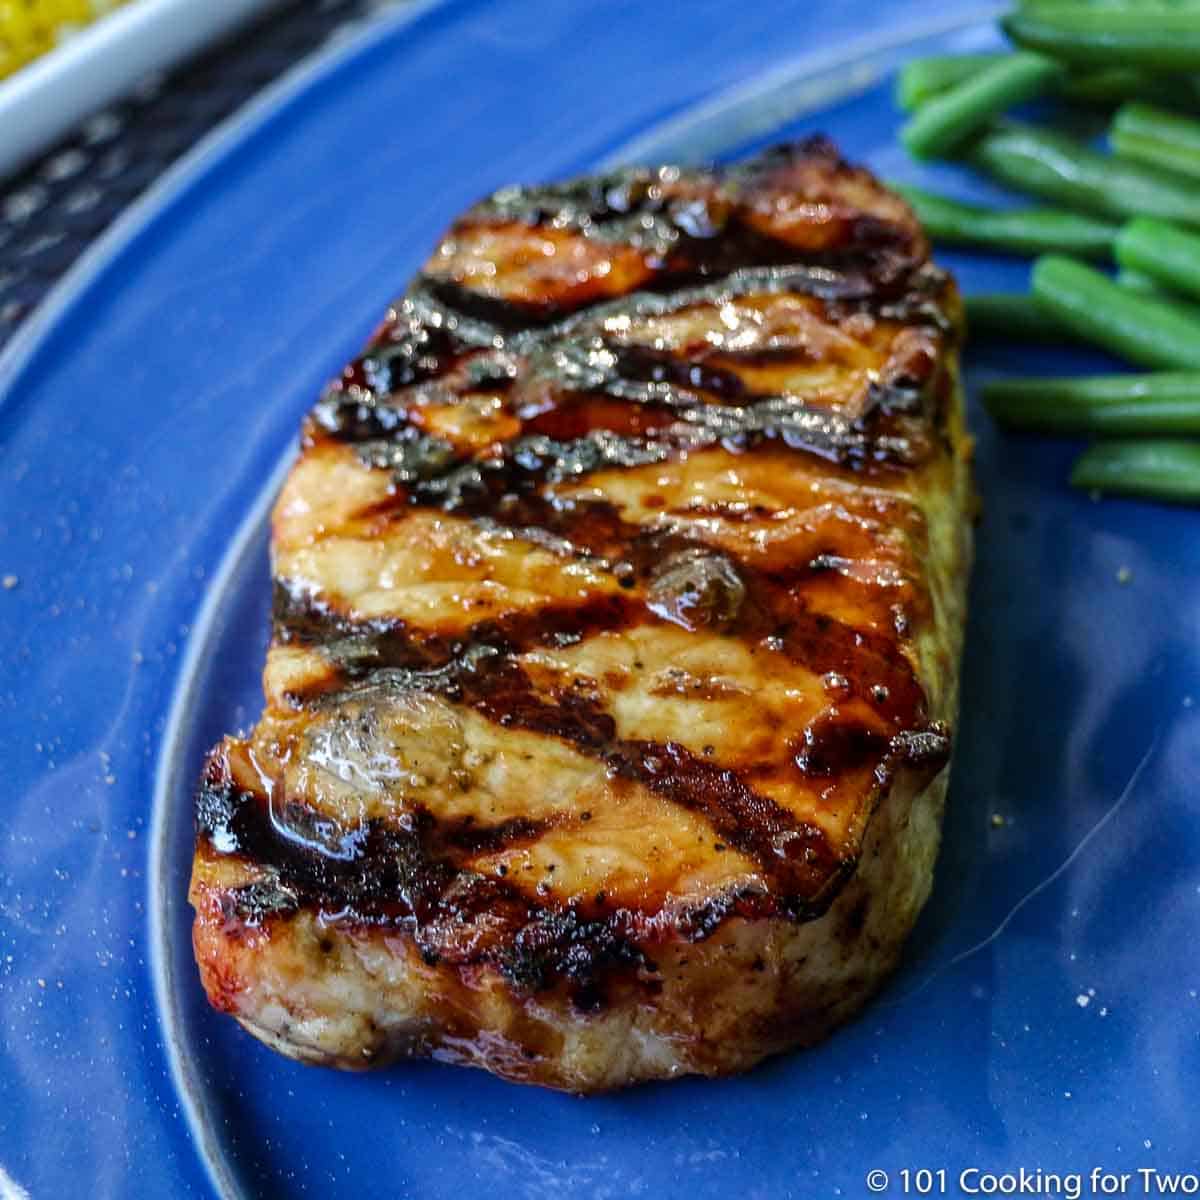 Apricot Glazed Grilled Pork Chops from 101 Cooking For Two